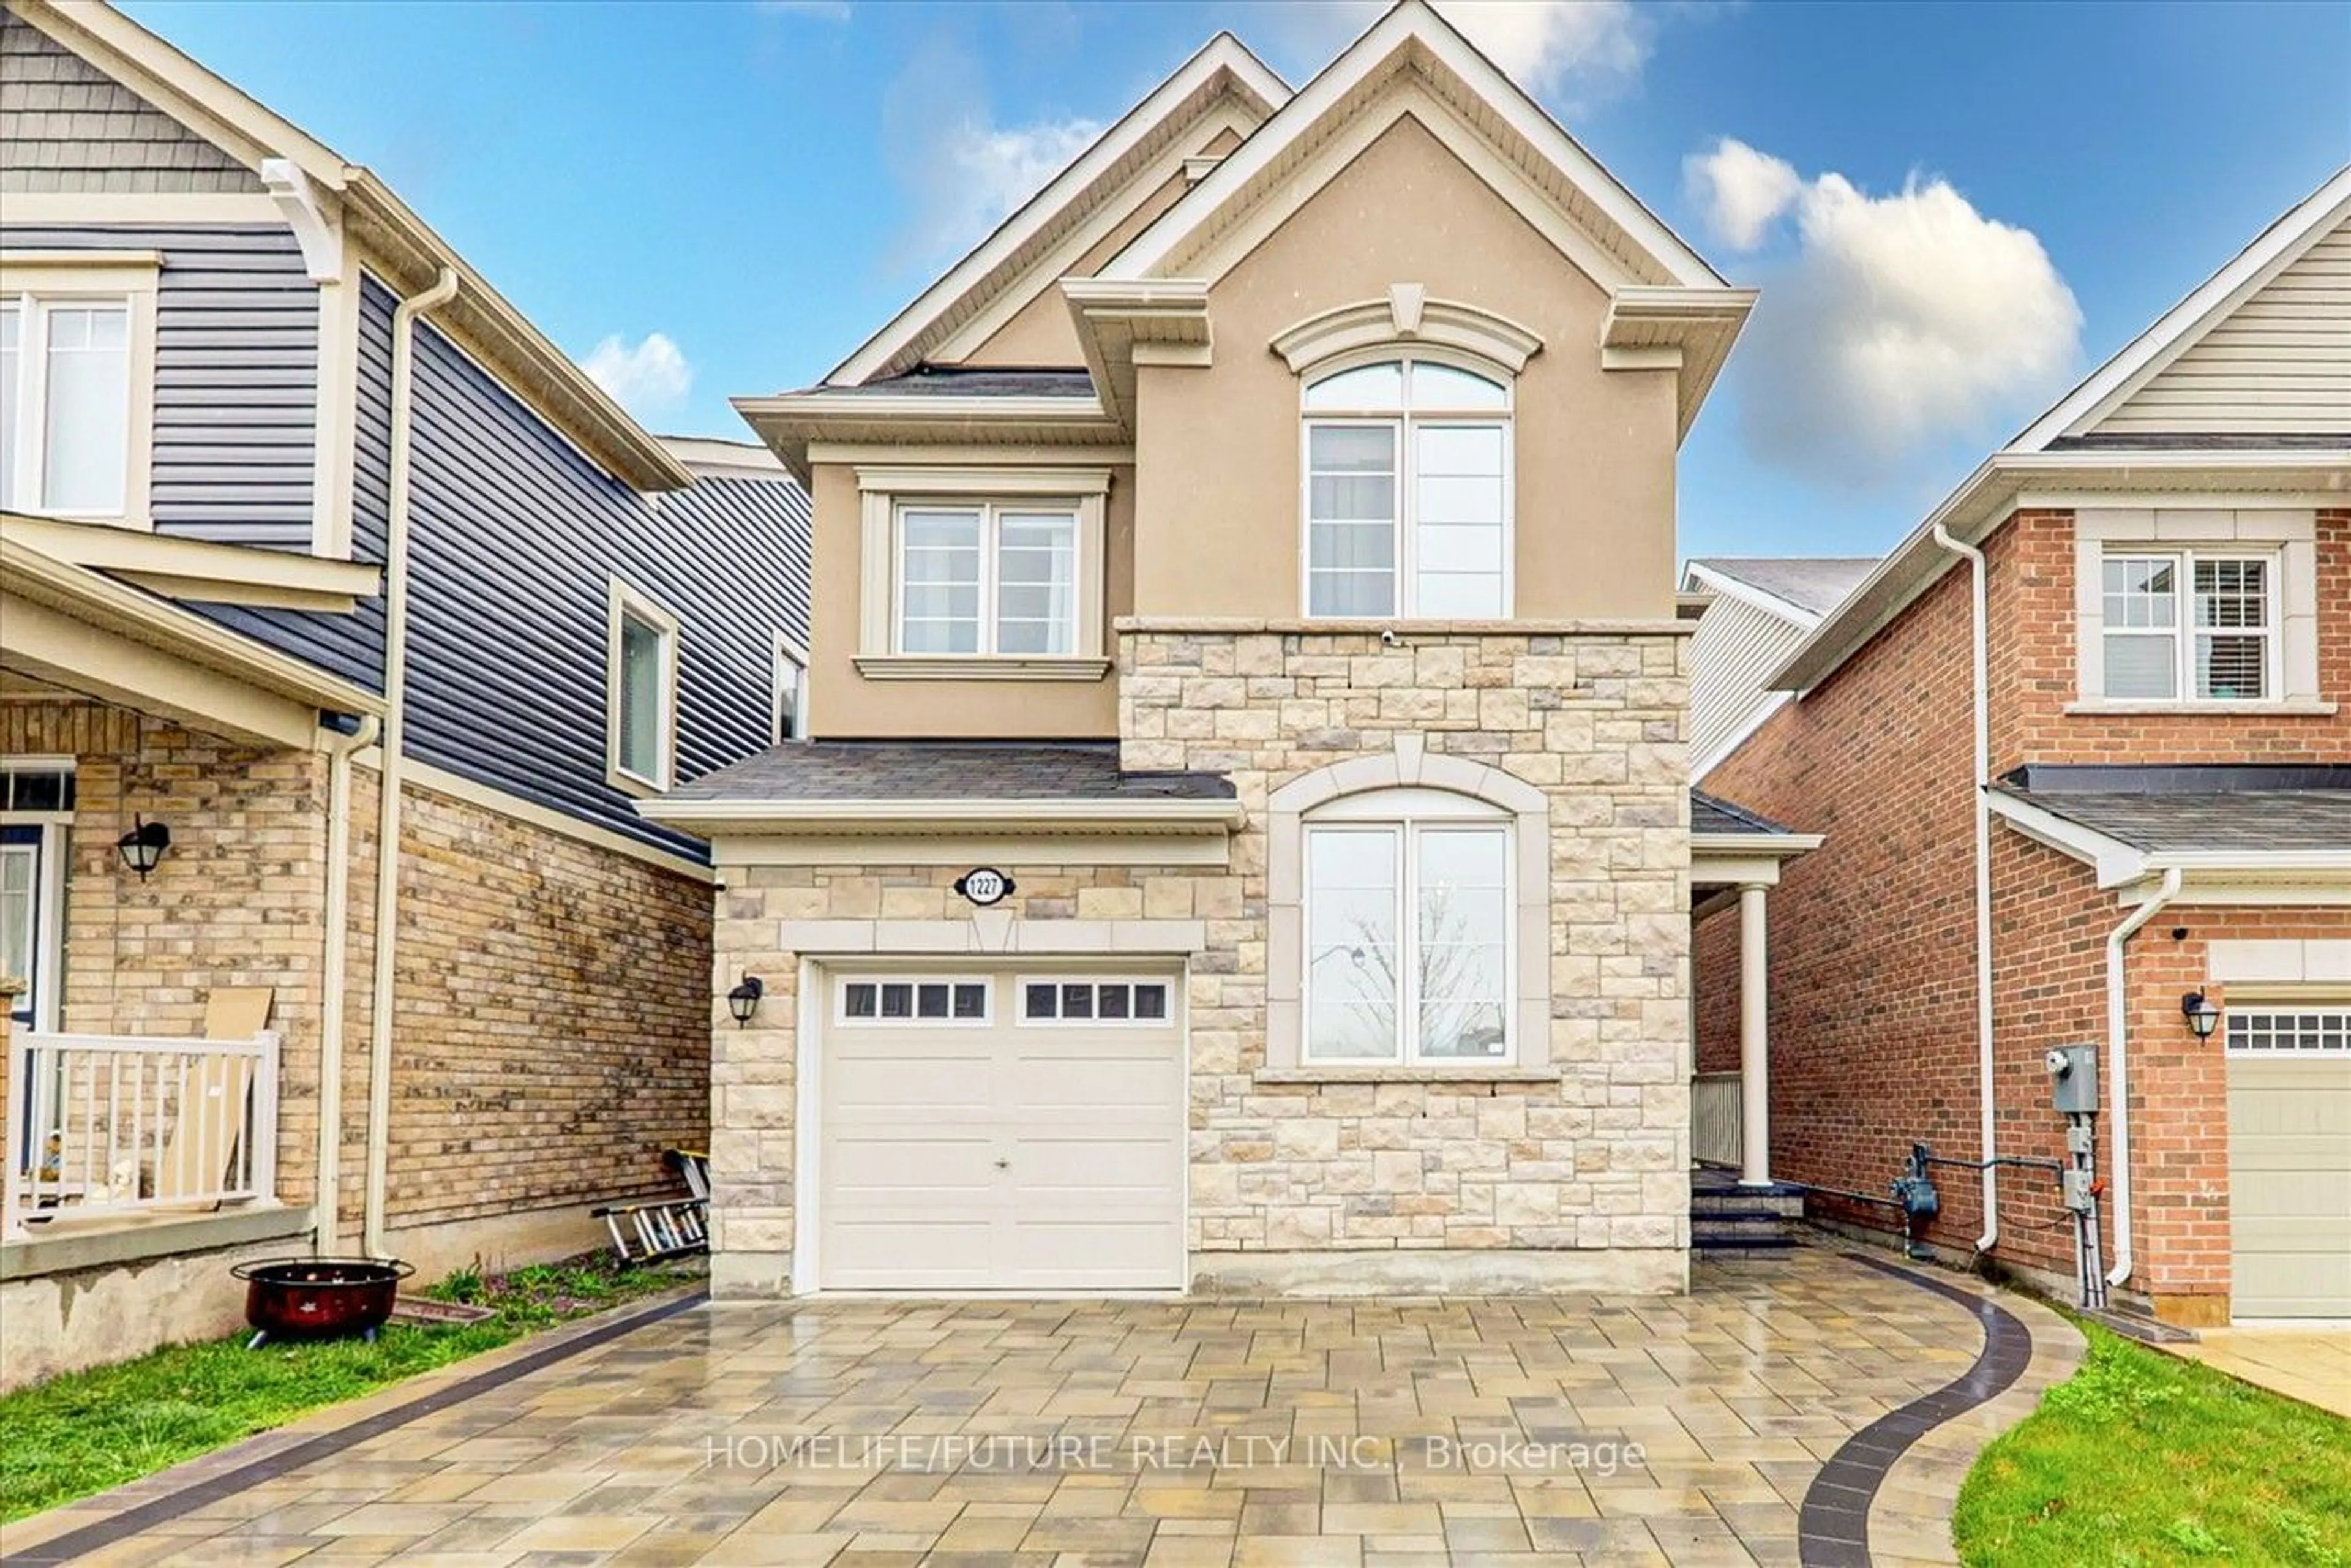 Home with brick exterior material for 1227 Farmstead Dr, Milton Ontario L9T 7K6